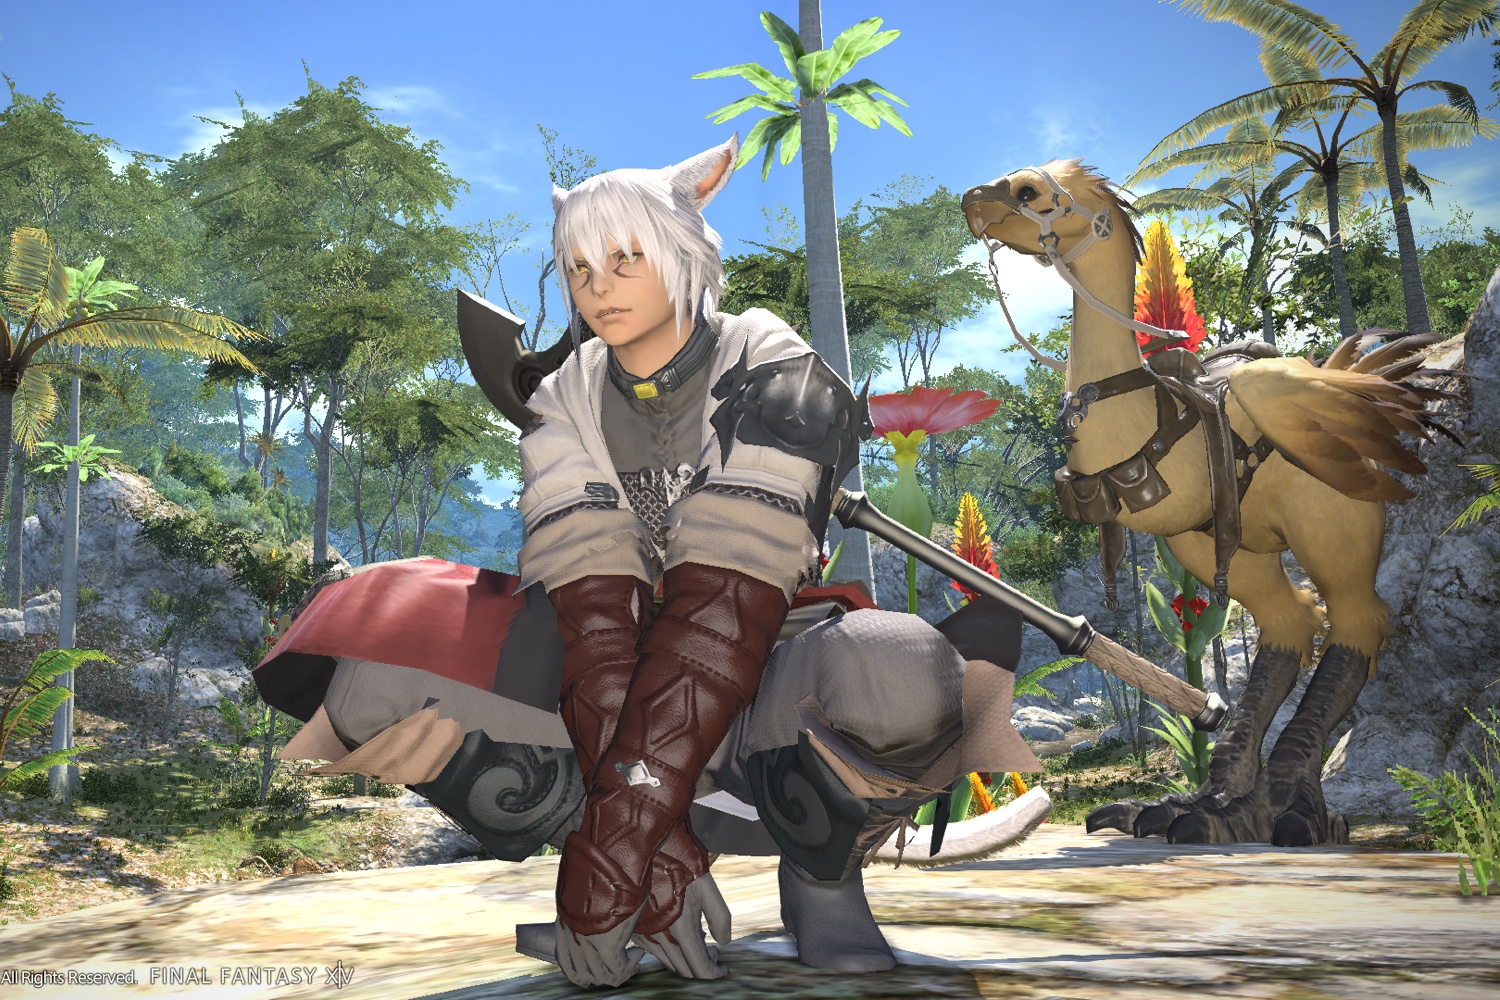 Glad Bortset bypass The Final Fantasy XIV PS4 Beta Is Live, and Anyone Can Join | Time